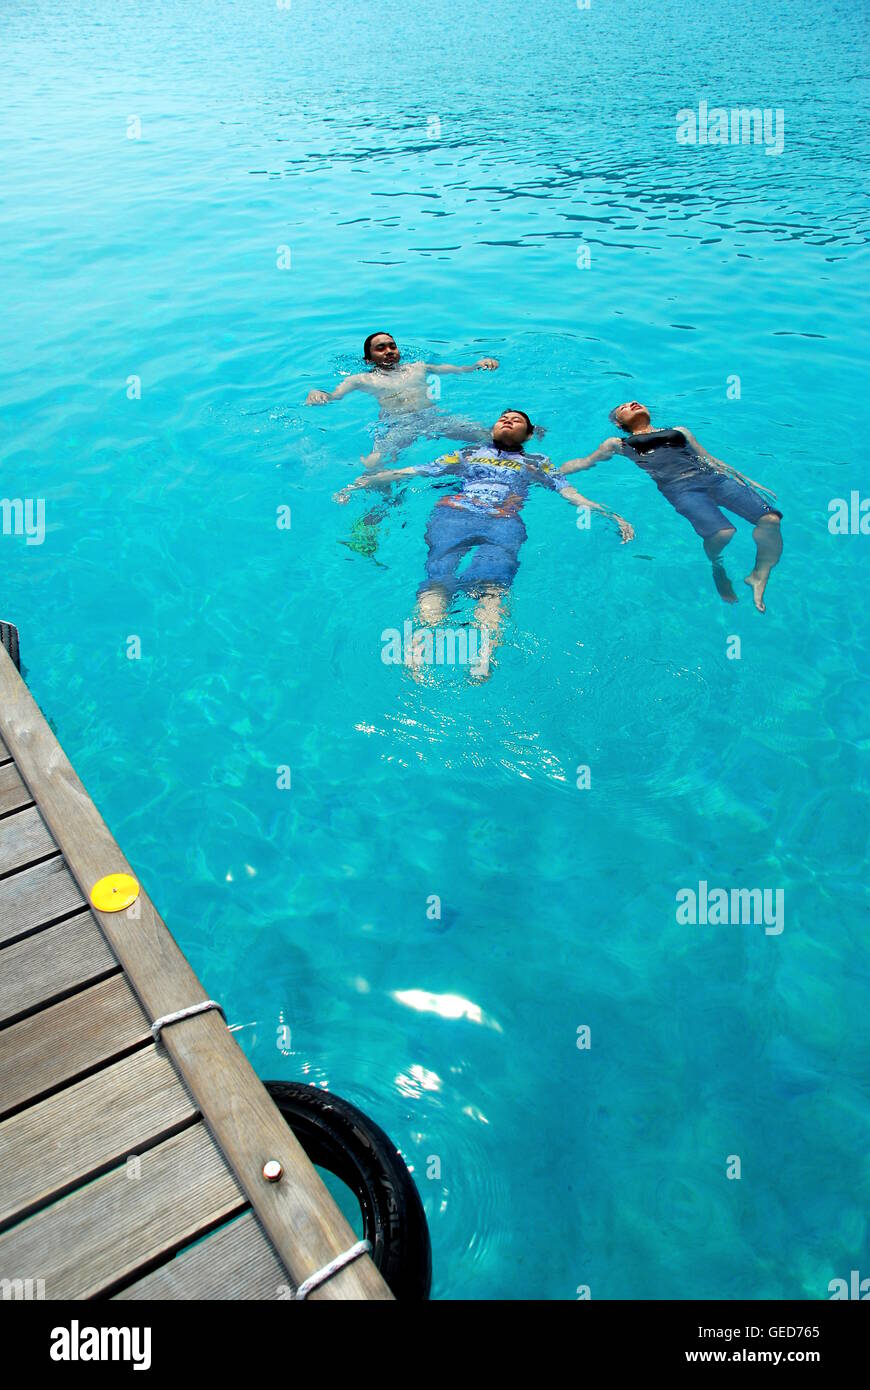 Swimming in the ocean Stock Photo